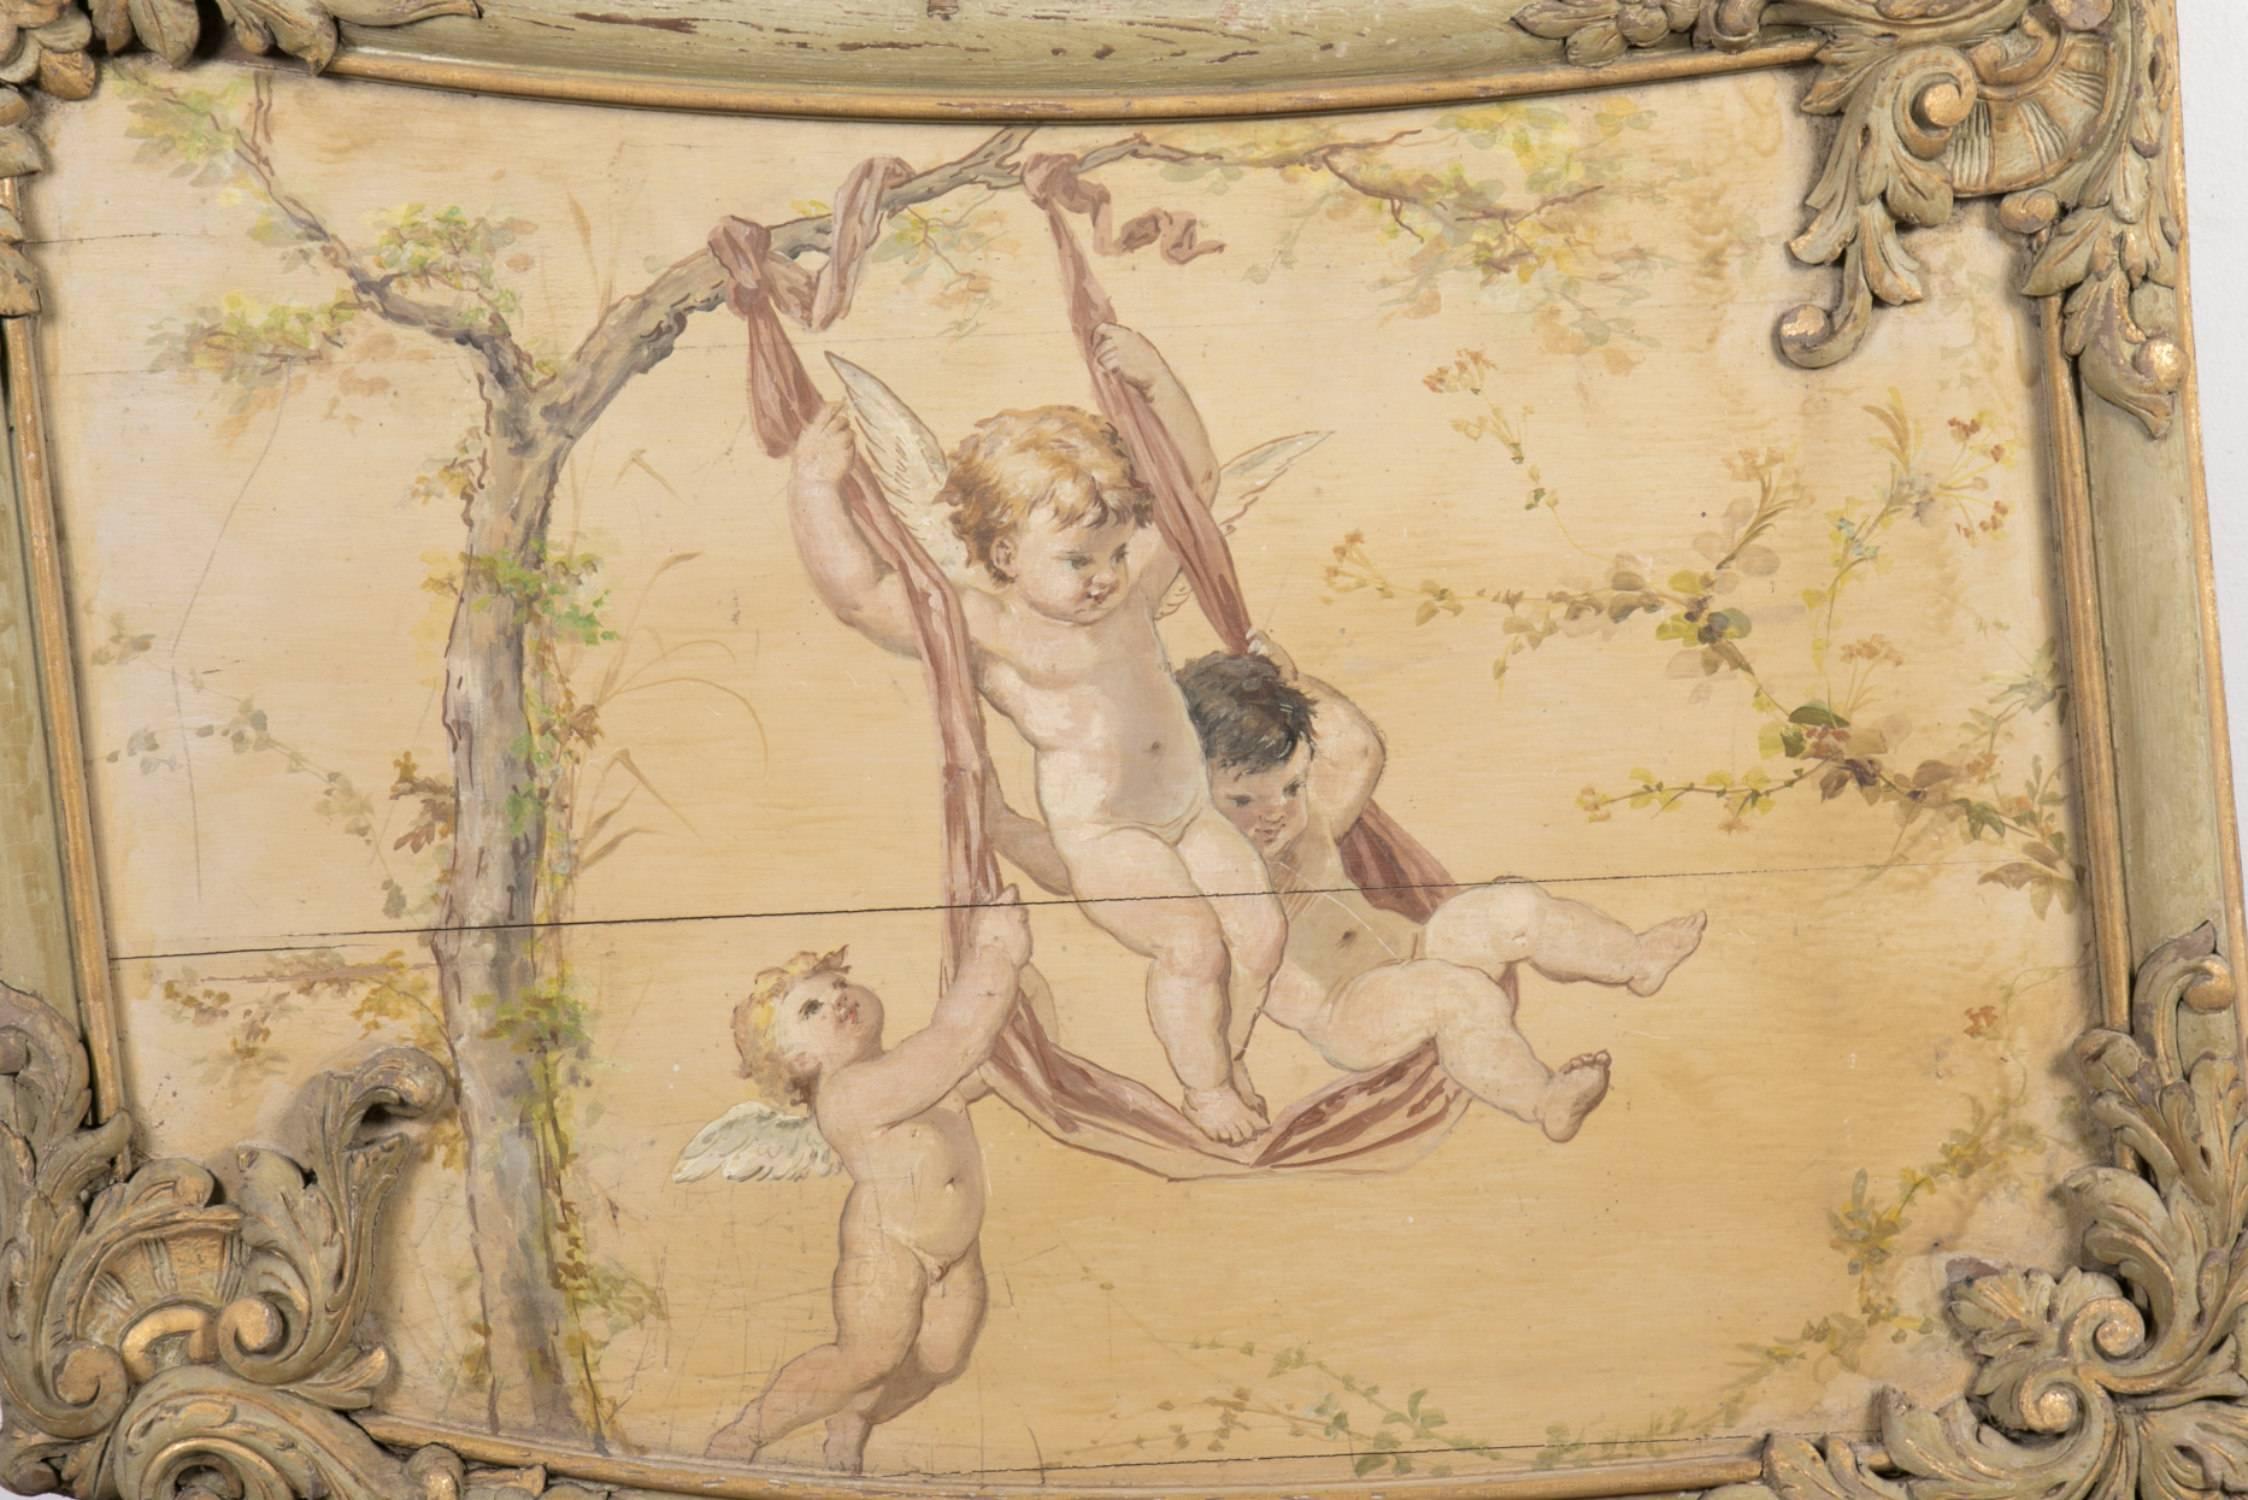 Rare and beautiful antique French carved parcel-gilt and painted boiseries panel with oil painting on board, once part of an entire boiseries (French wooden paneled room). The oil painting in the centre of this Louis XV style boiseries panel depicts